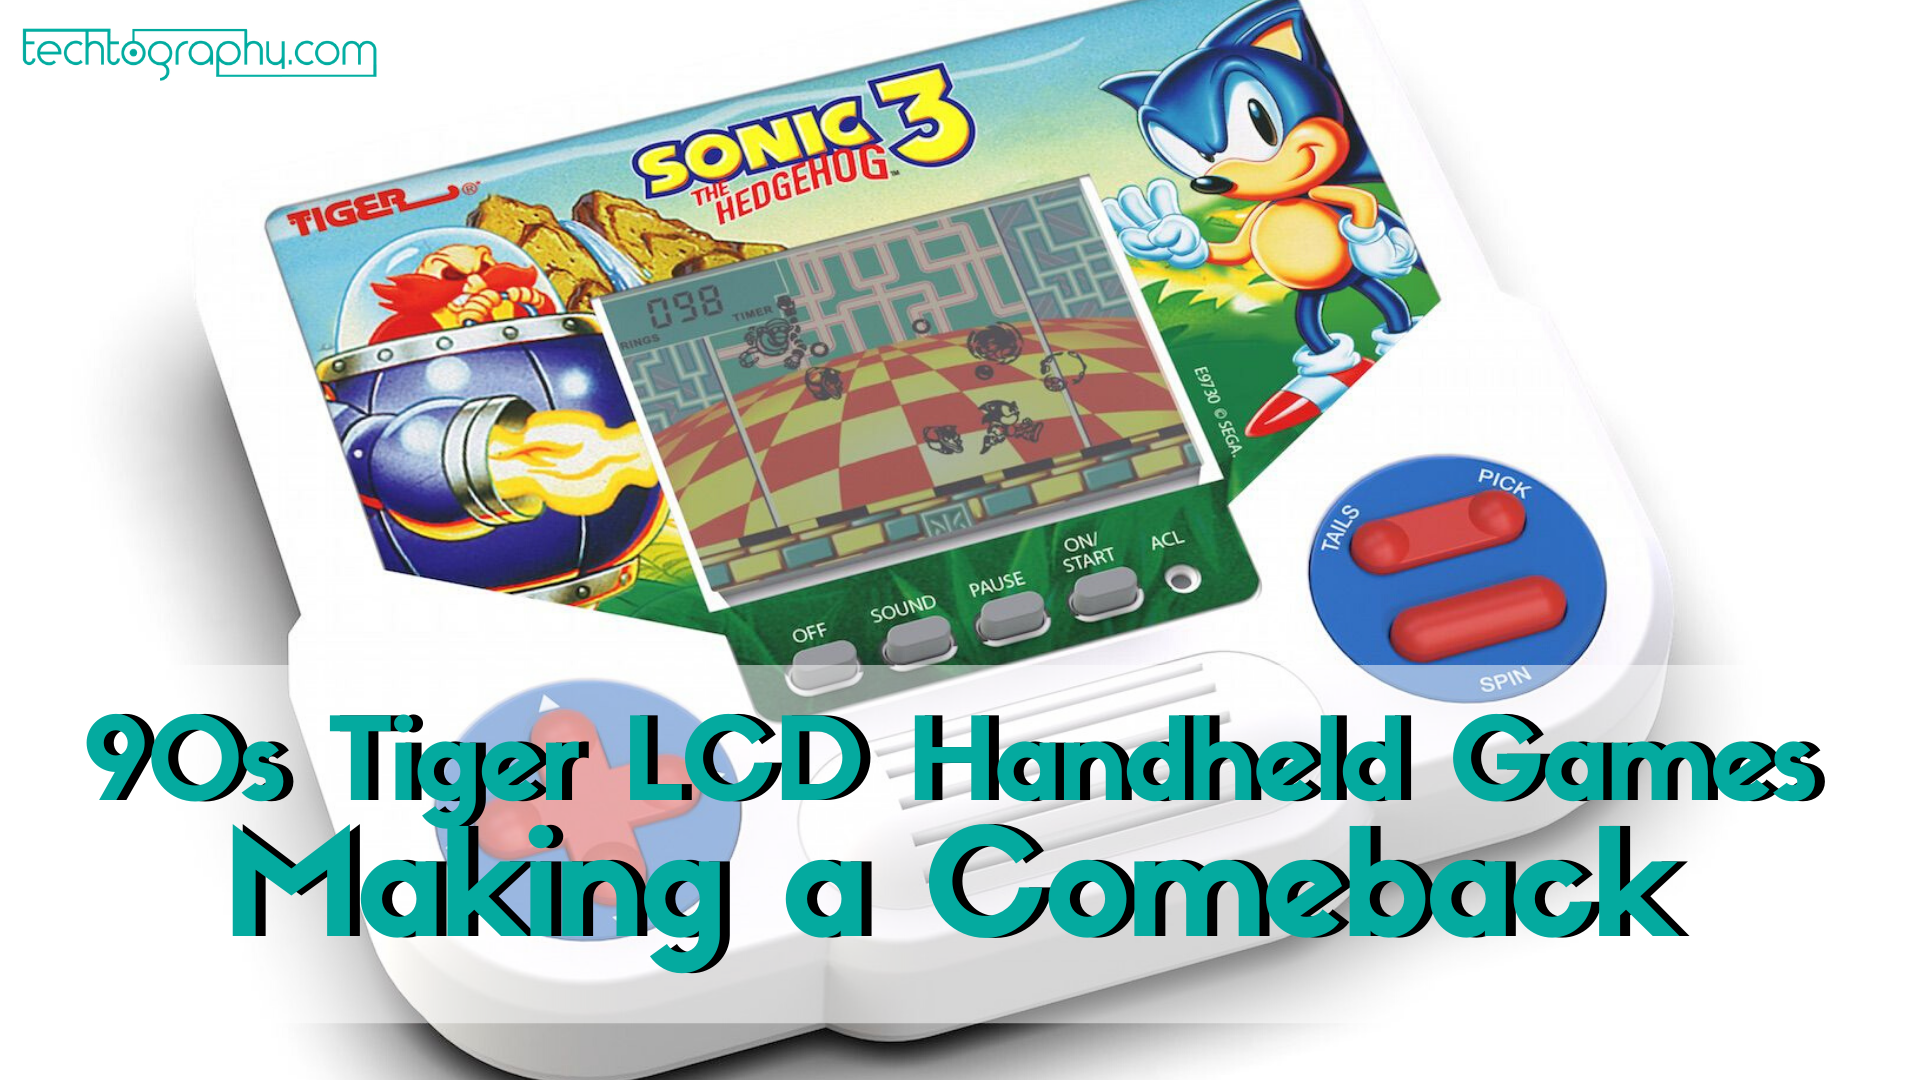 90s Tiger LCD Handheld Games Making a Comeback